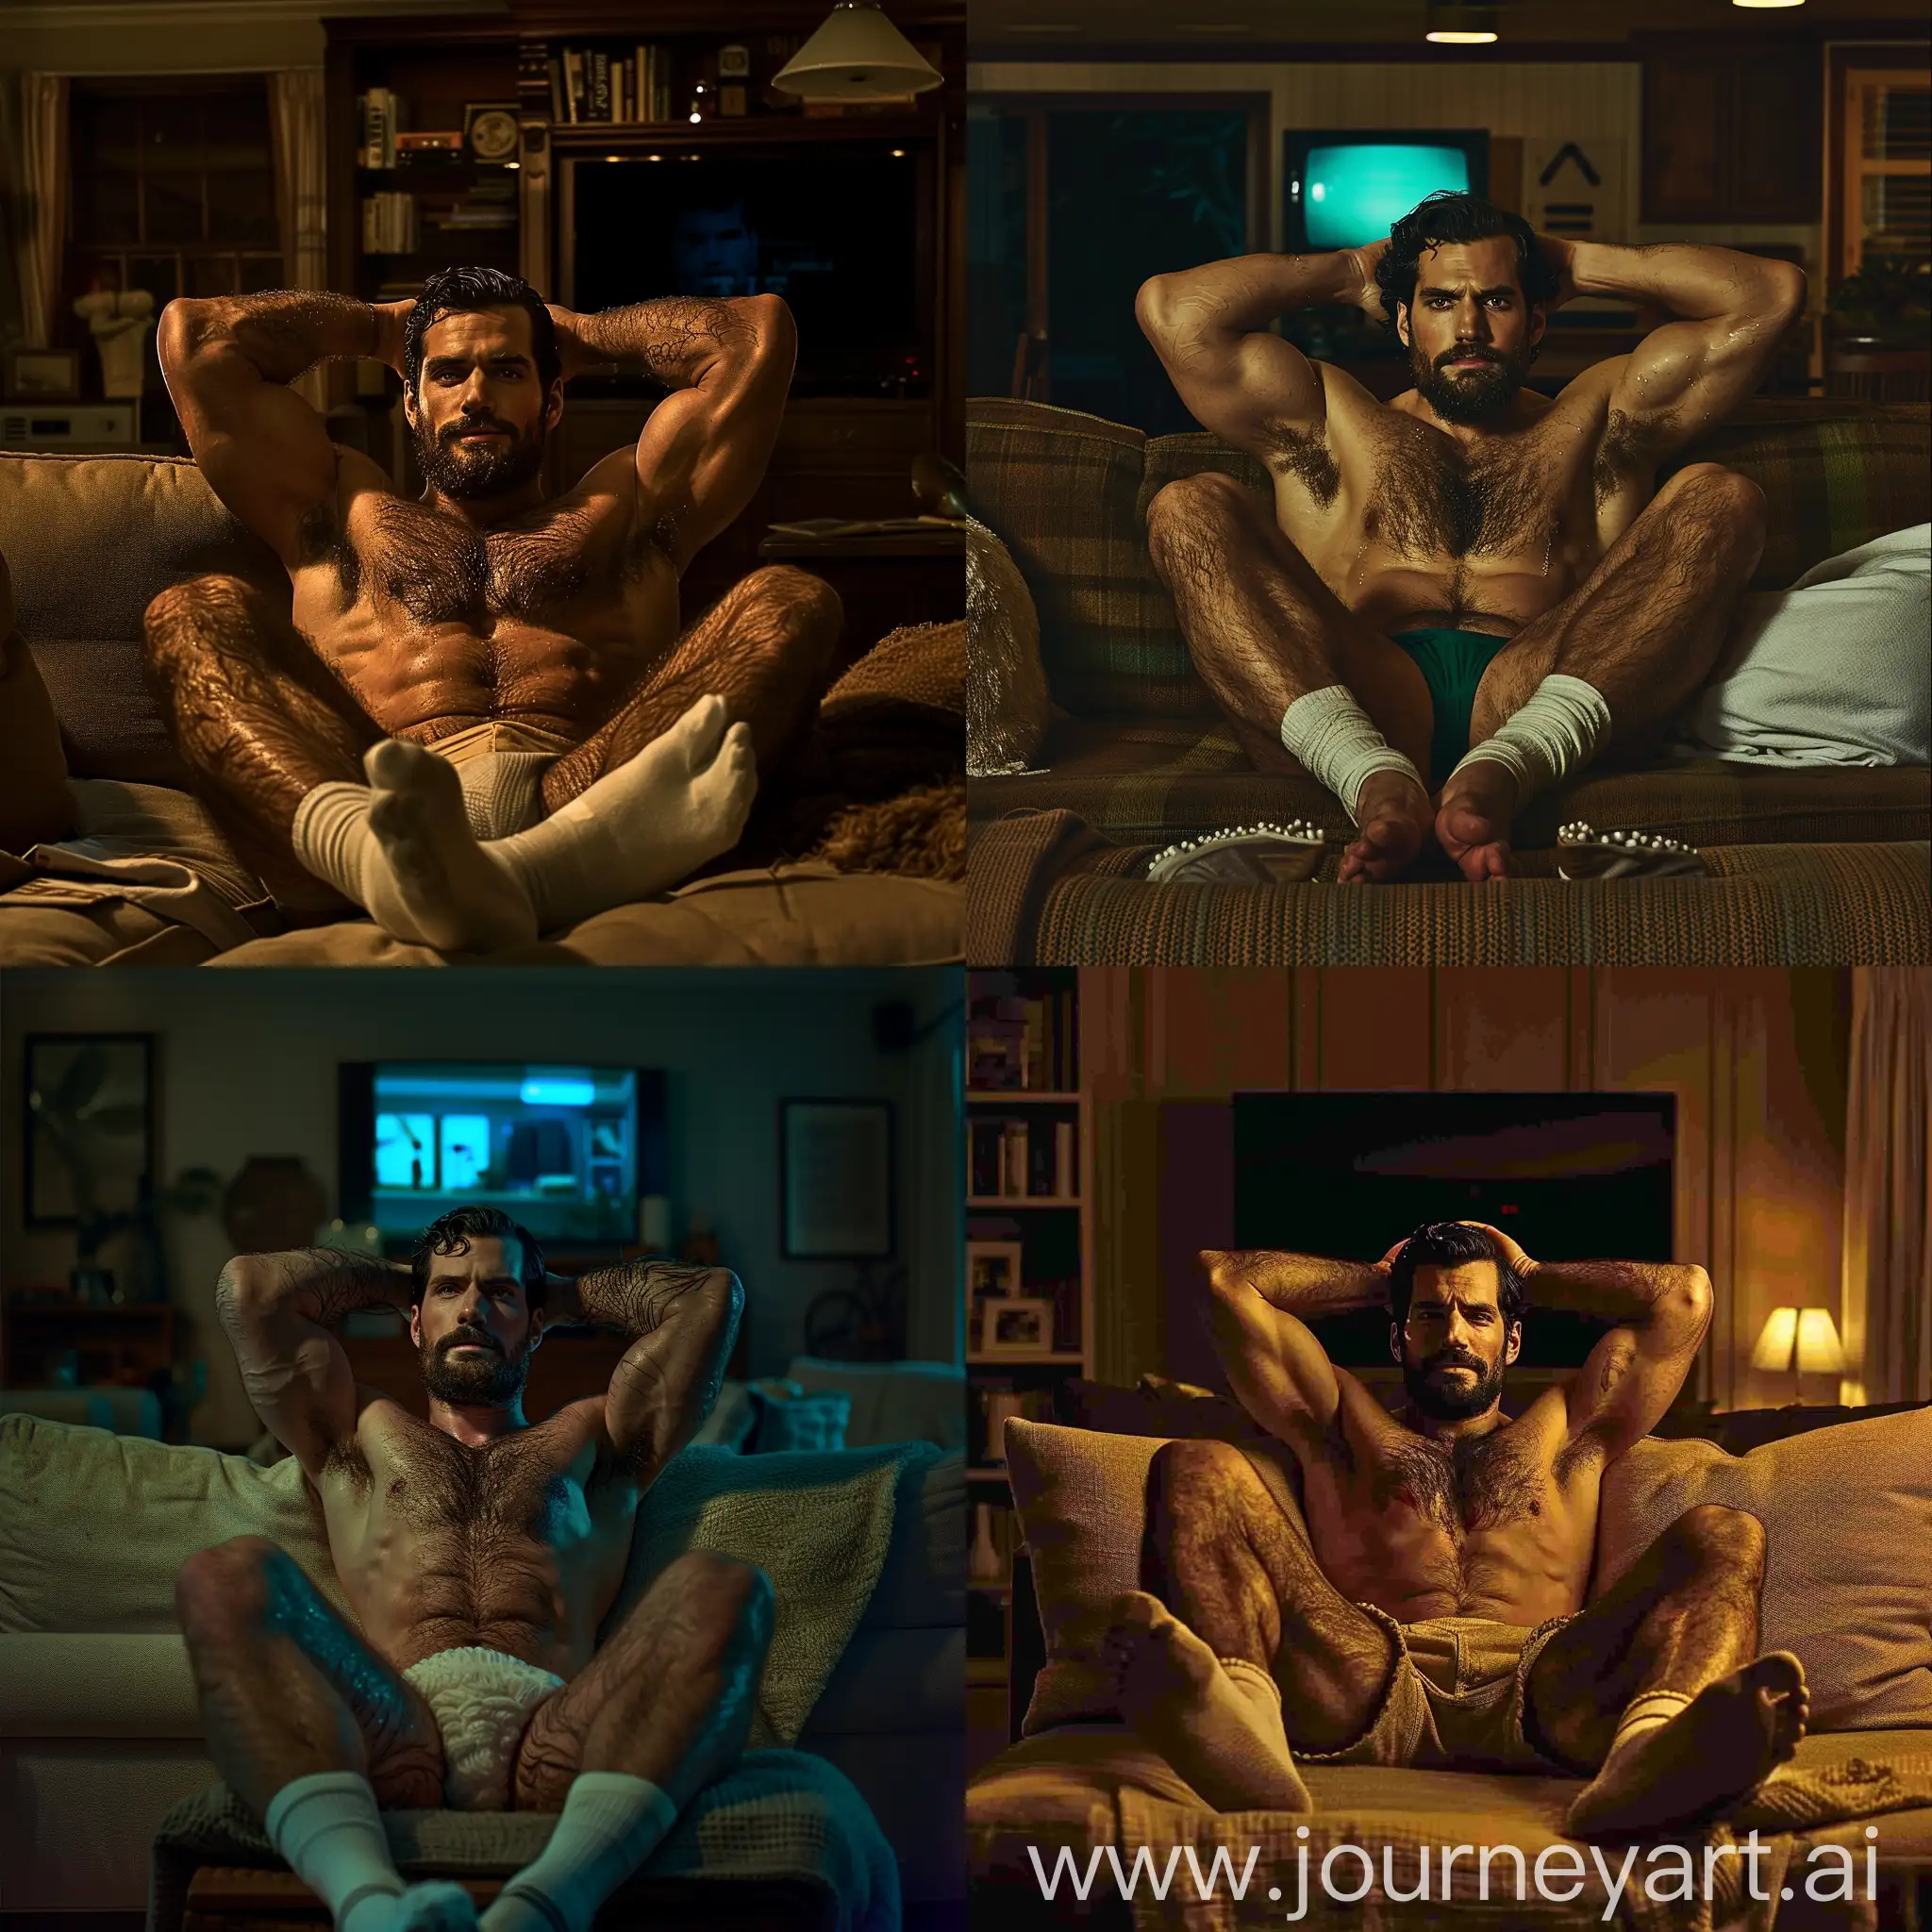 Realistic, cinematic lighting, low lighting at night, handsome burly Henry Cavill sitting on a couch, burly muscular hairy body, hands behind his head, hairy armpits, good looking bearded Henry Cavill face, hairy chest, sweaty glistening skin, sitting on the couch, legs stretched, with his feet on a footstool, wearing white socks, with his big soles on a footstool table, displaying big white sock soles, rich living room background at night, Tv lighting ambient